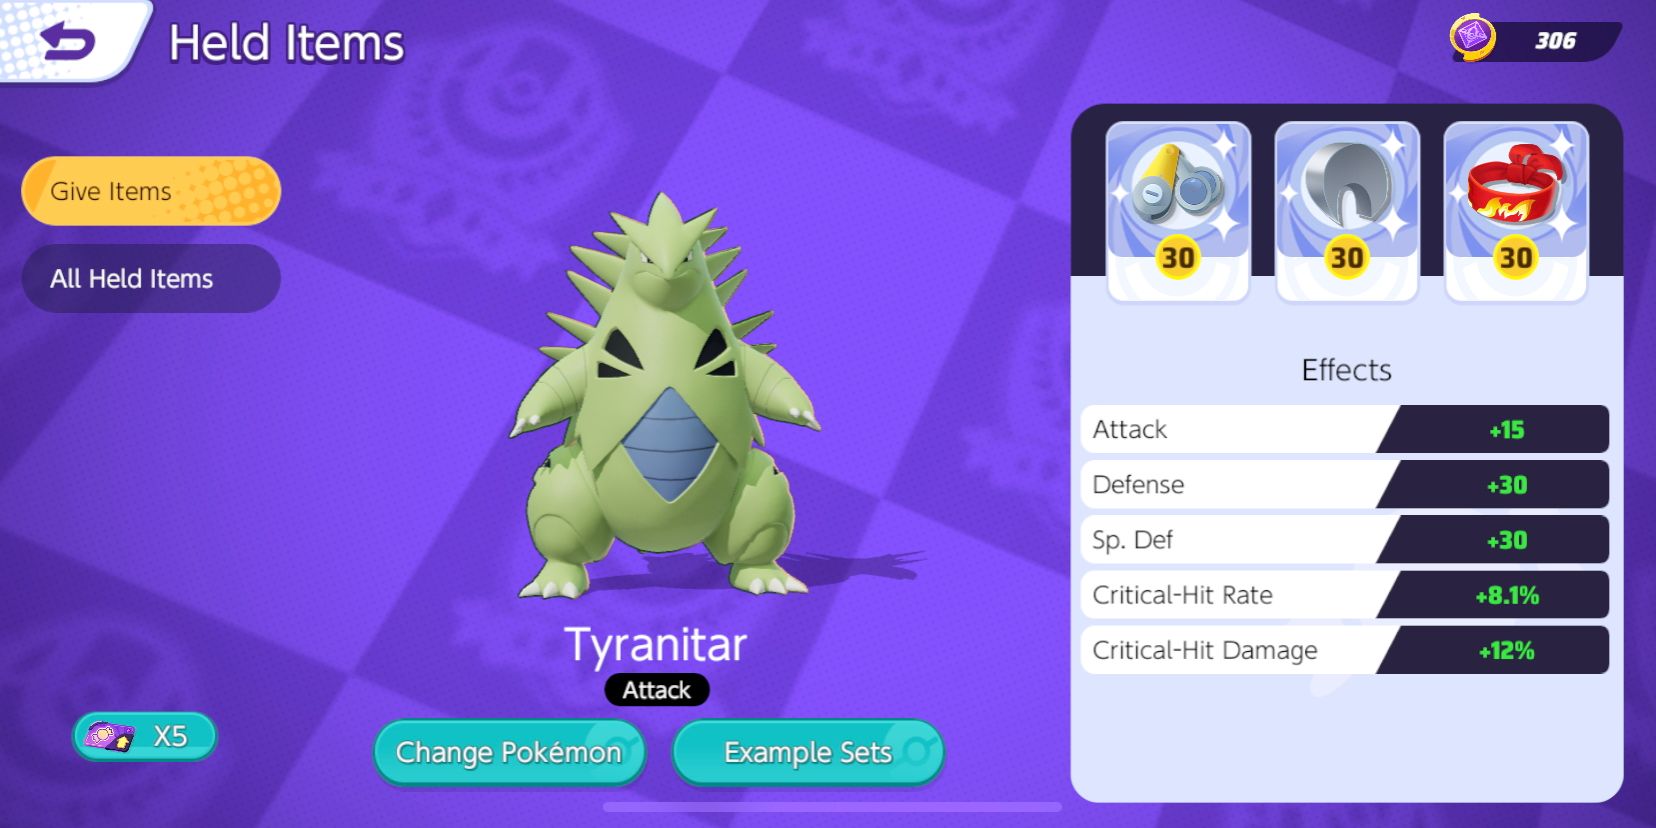 Tyranitar's Held Item selection screen showing its three Held Items and stats